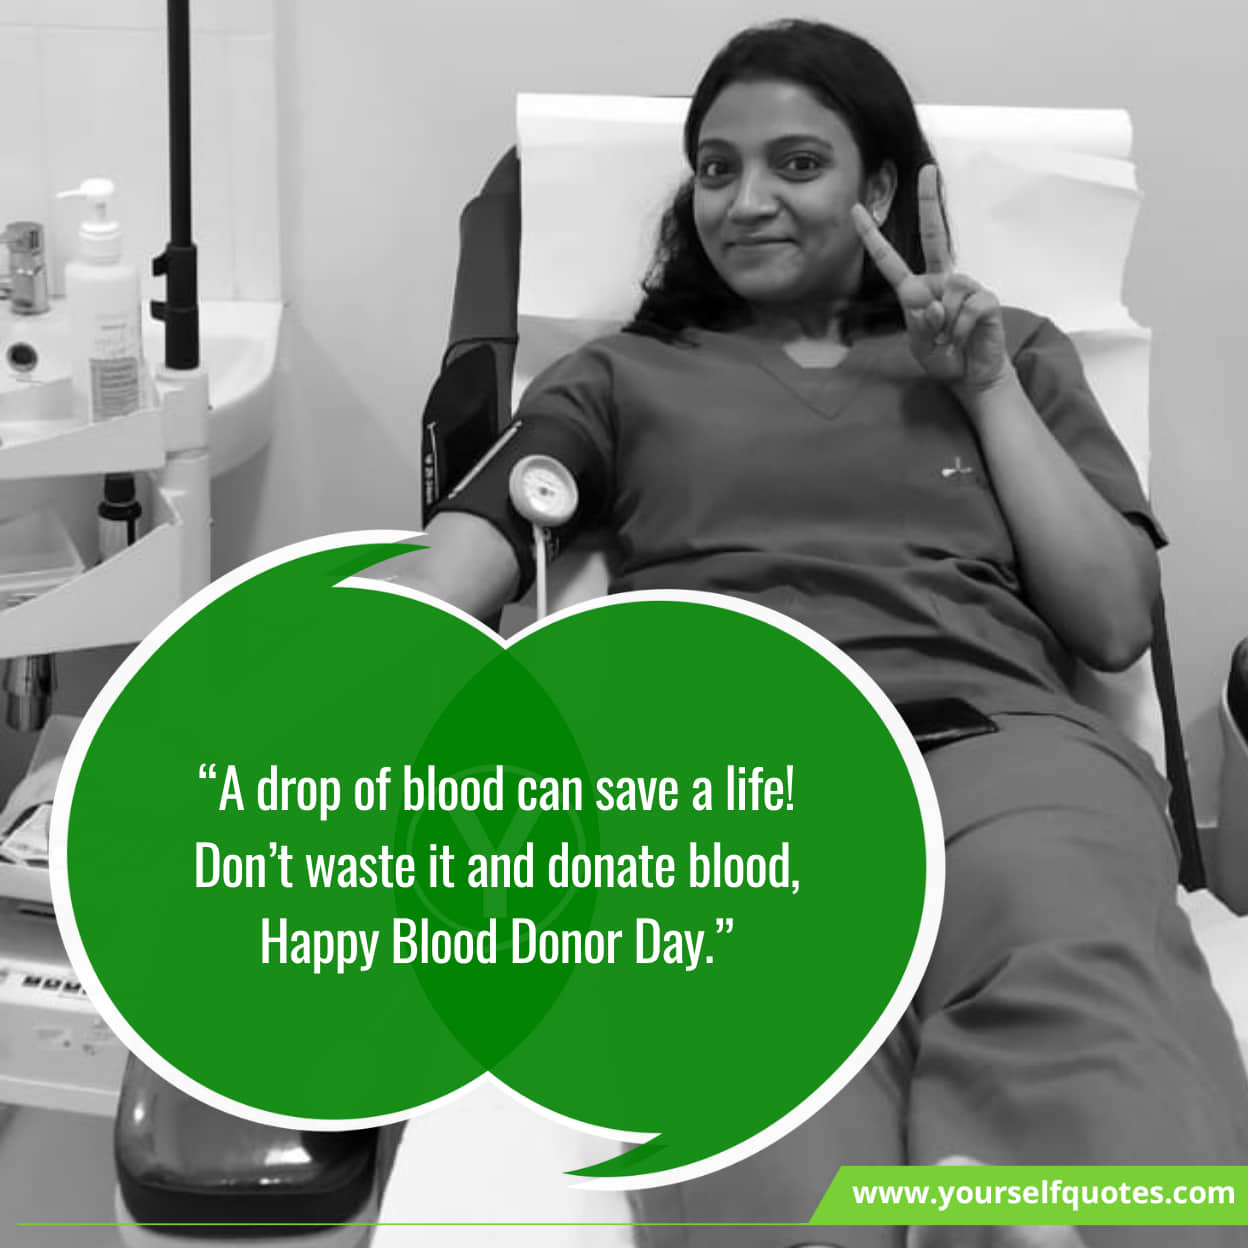 Blood Donor Day Sayings & Greetings